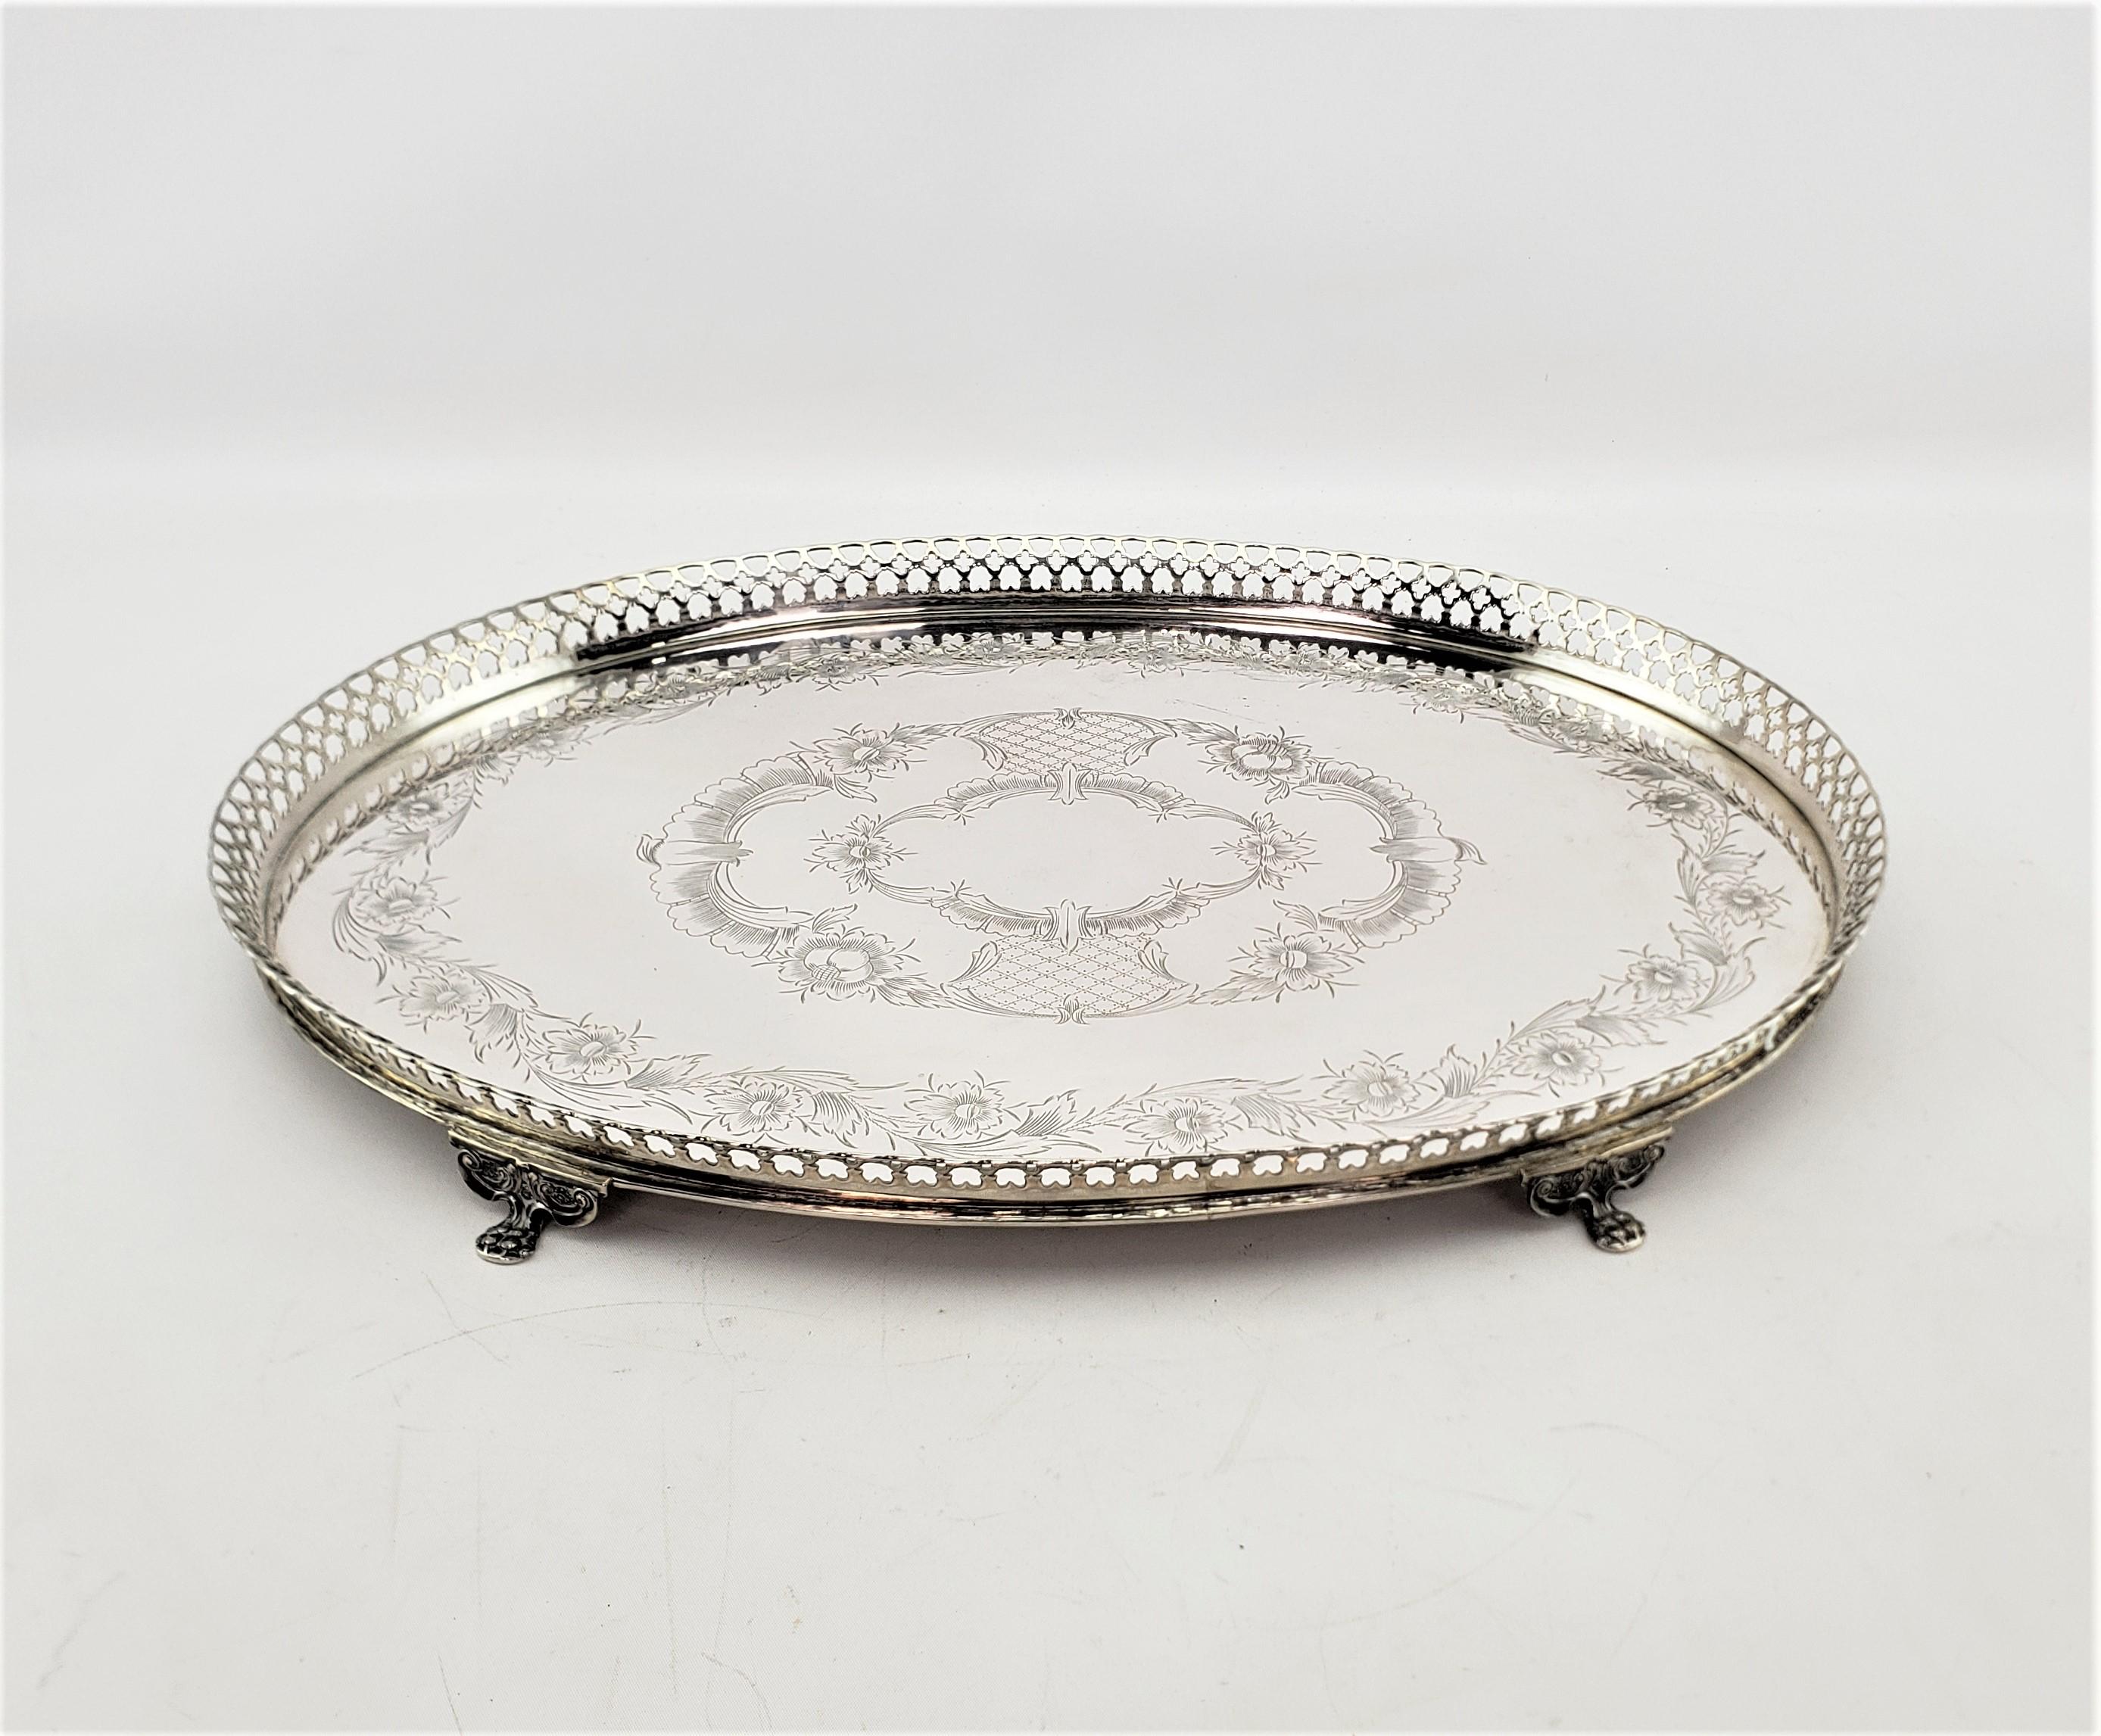 This antique oval serving tray was made by Topazio of Portugal in approximately 1900 in a Victorian style. The tray is composed of .833 silver and has a pierced gallery and ornate floral engraving on the top of the tray. The tray stands on four